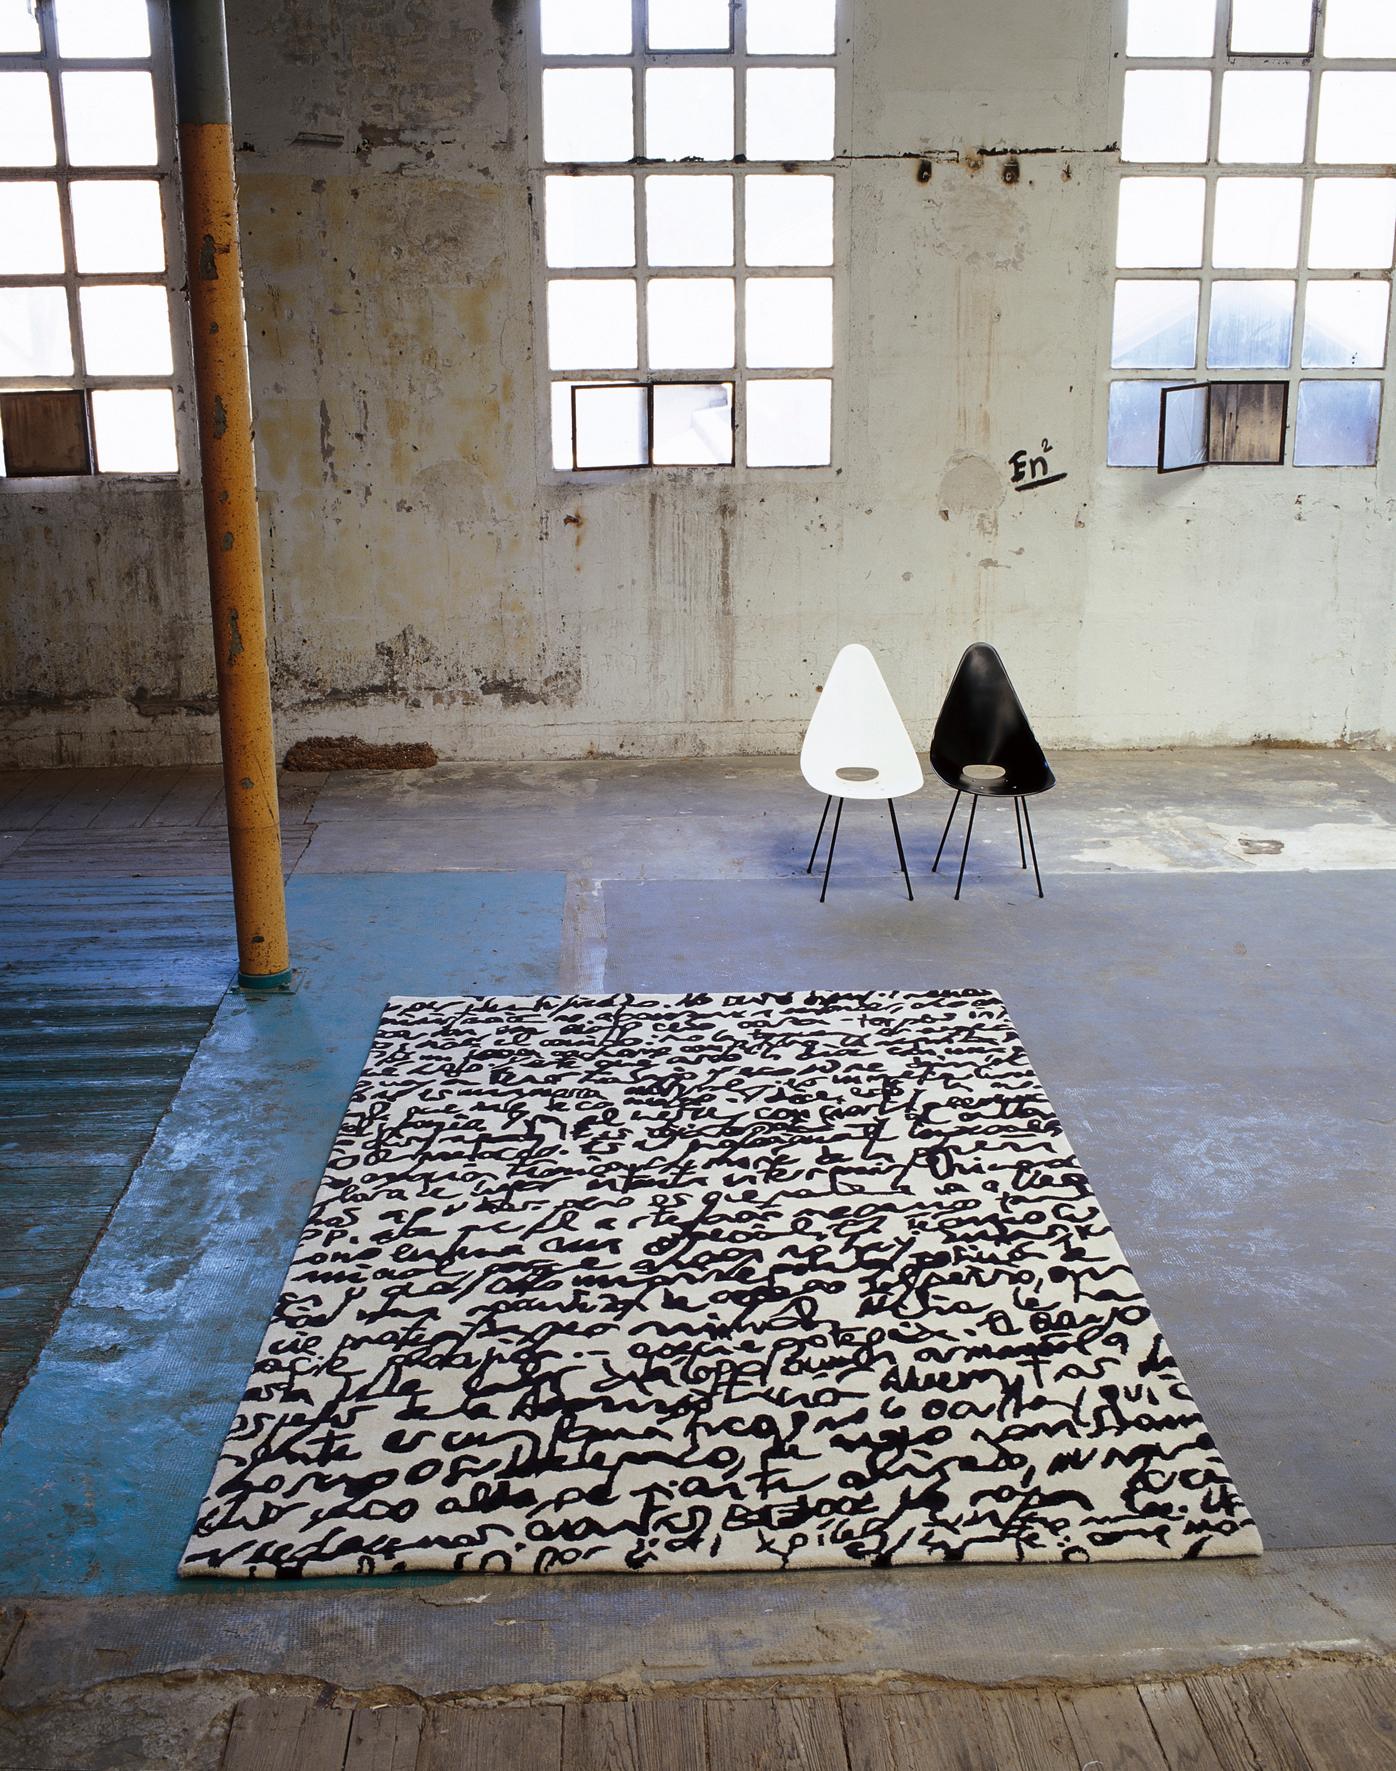 Large Hand-Tufted 'Manuscrit' Rug by Joaquim Ruiz Millet for Nanimarquina.

Executed in 100% hand-tufted New Zealand wool. The absence of color makes each of these rugs a dichotomy, a canvas in its own right. The stark contrast of black and white